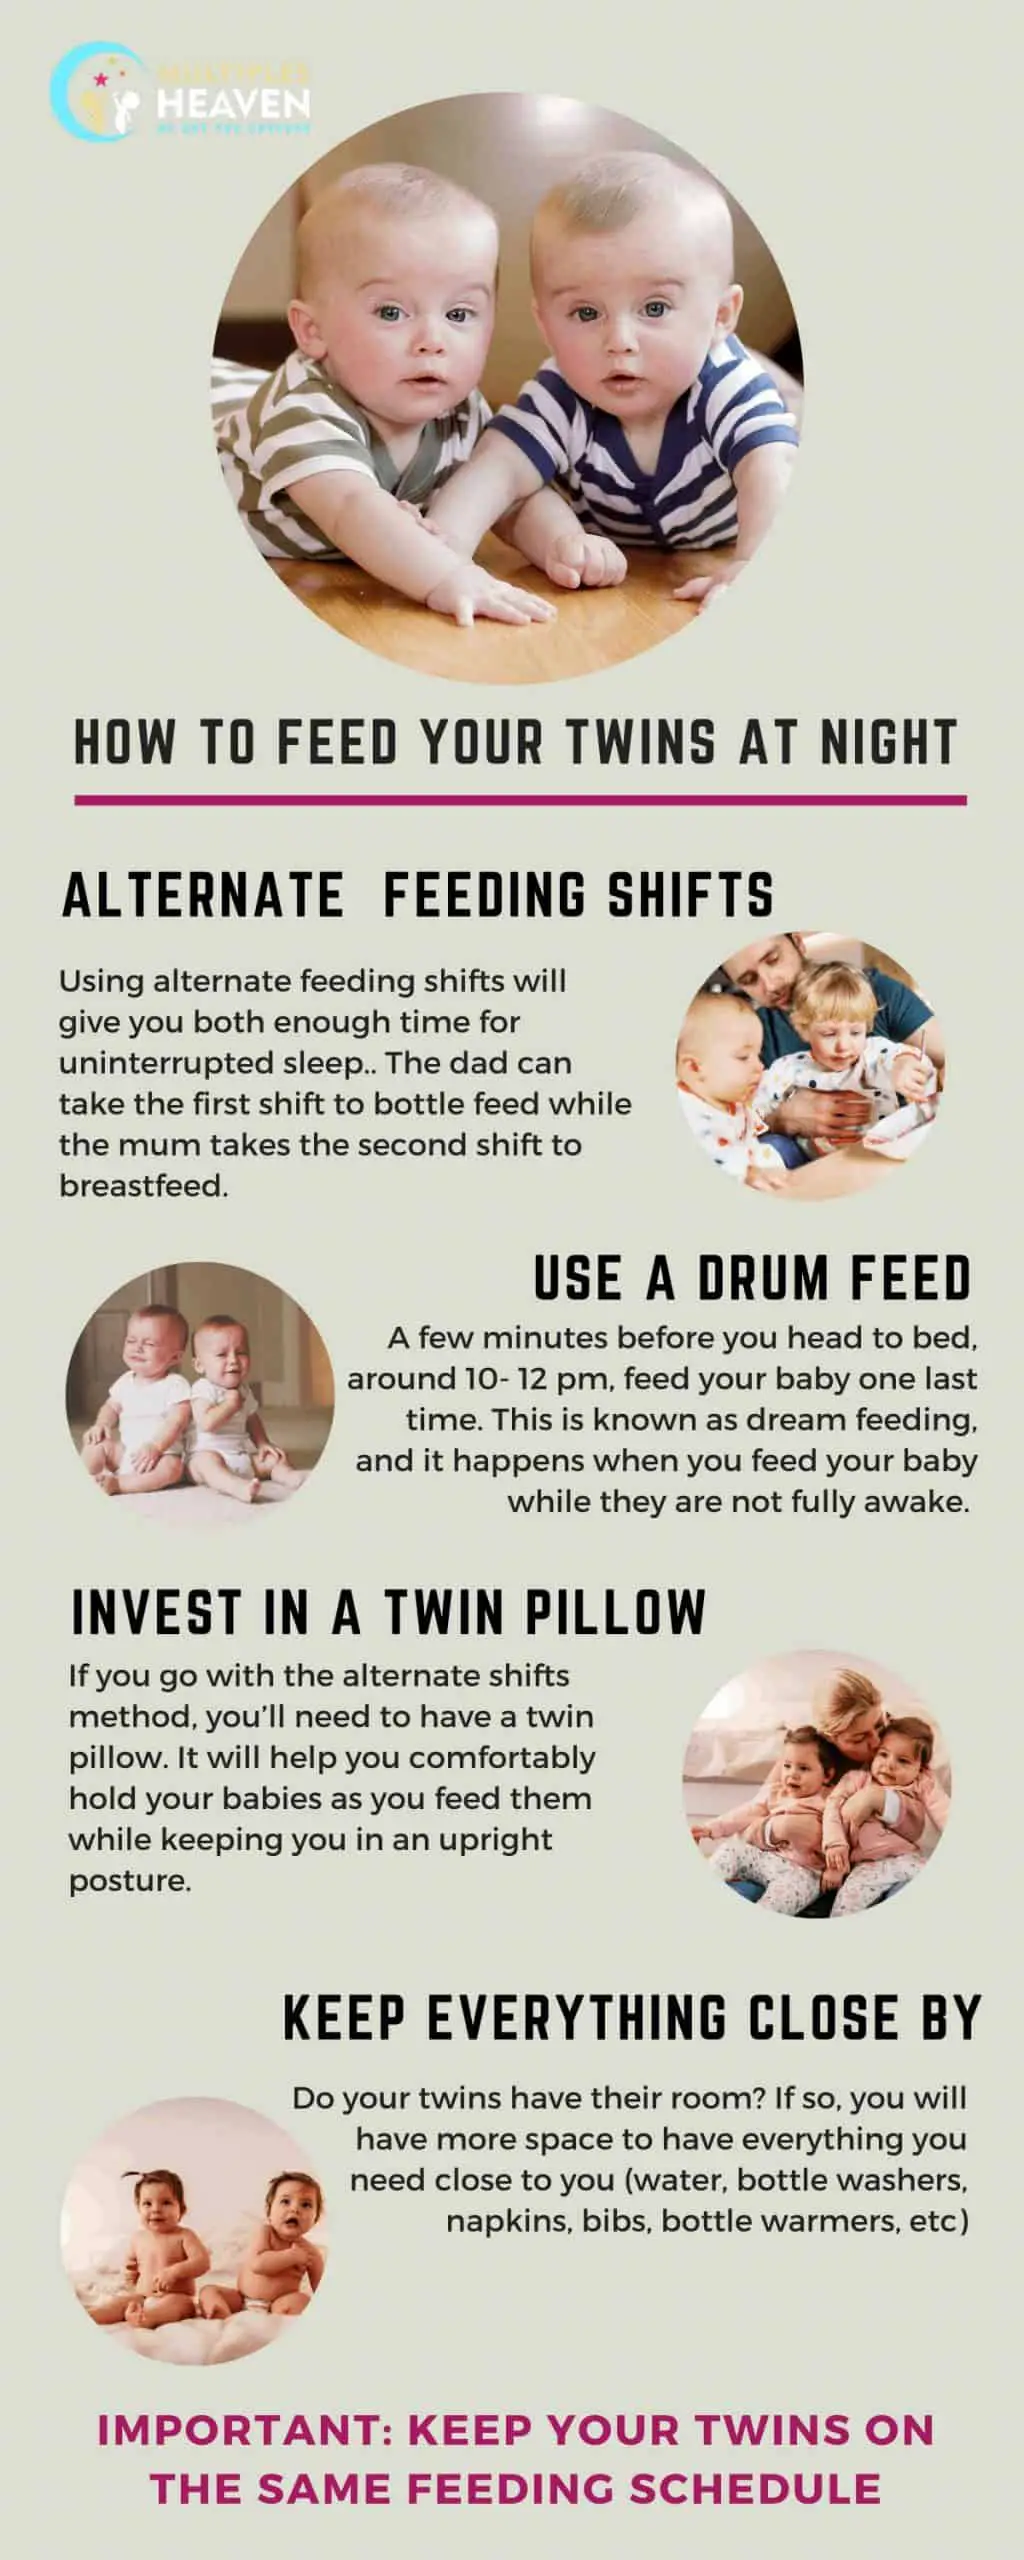 How to feed your twins at night